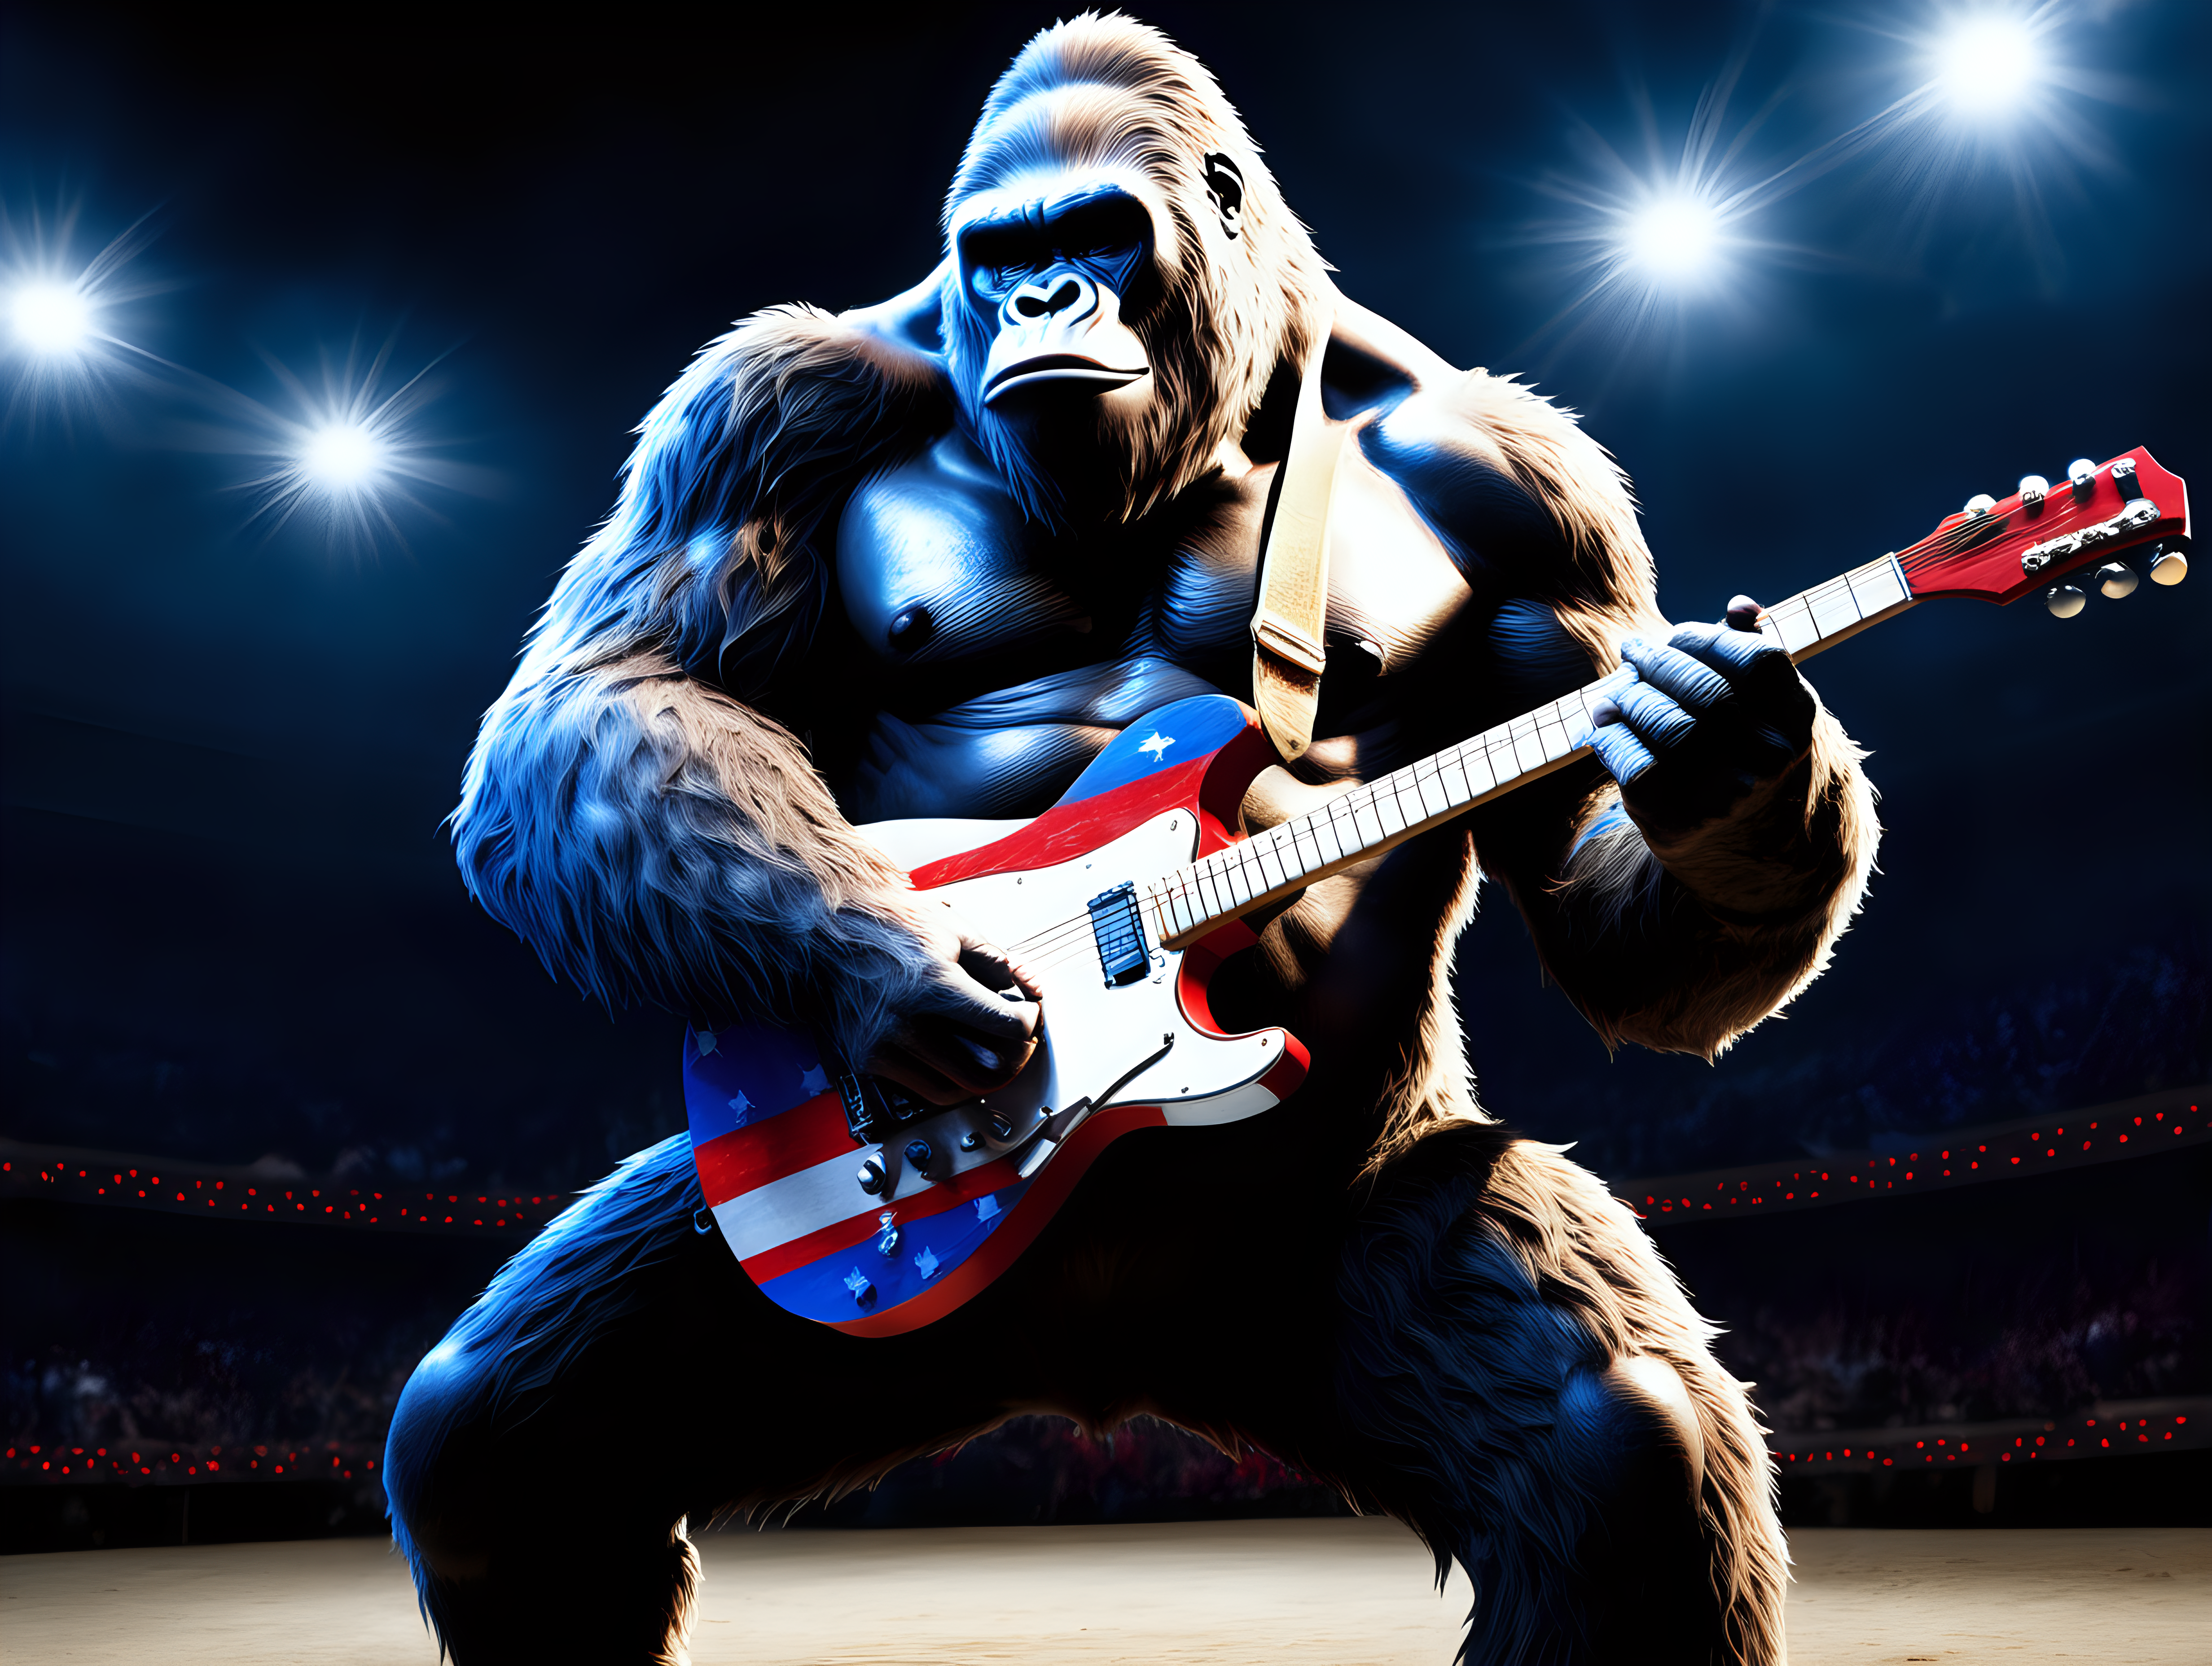 King Kong playing a red white and blue